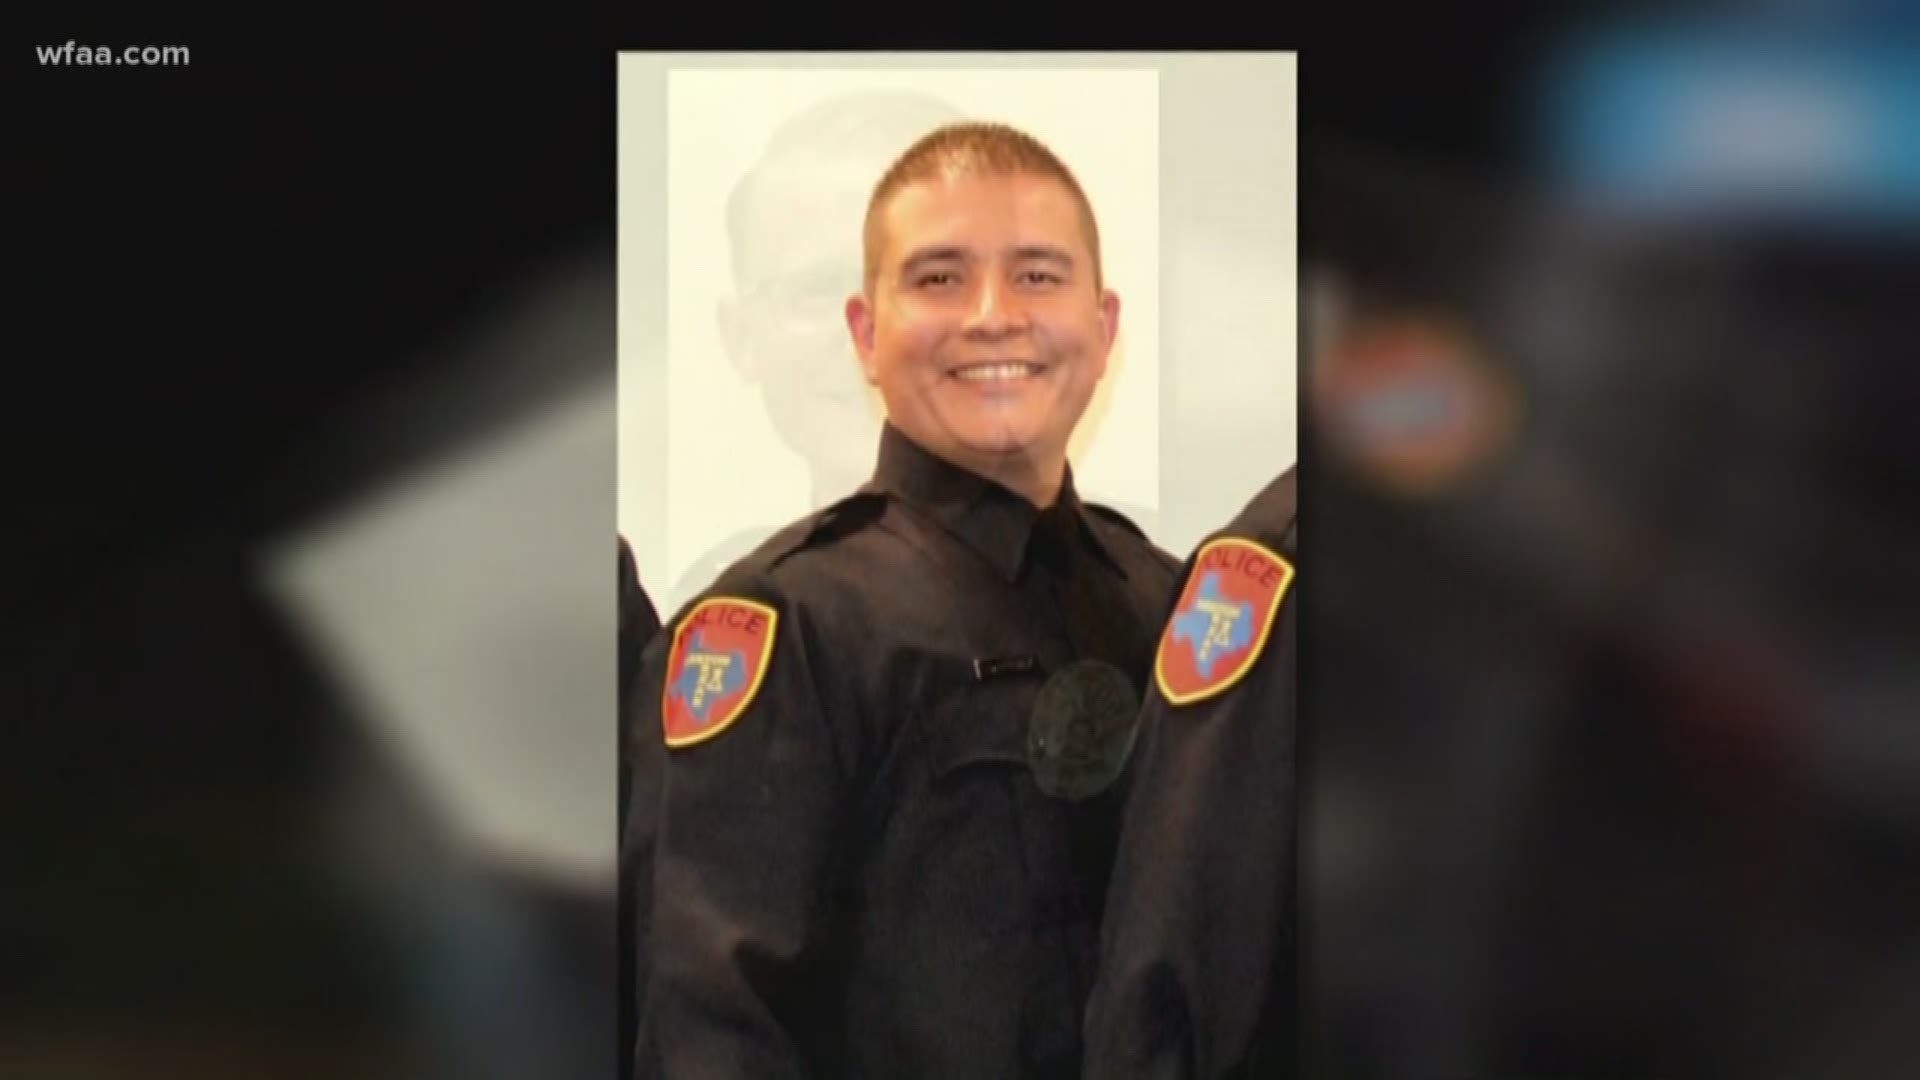 Urbano Rodriguez Jr., a five-year veteran of the Denton Police Department, was shot twice during the traffic stop. He was hit once in the head and once in the leg.